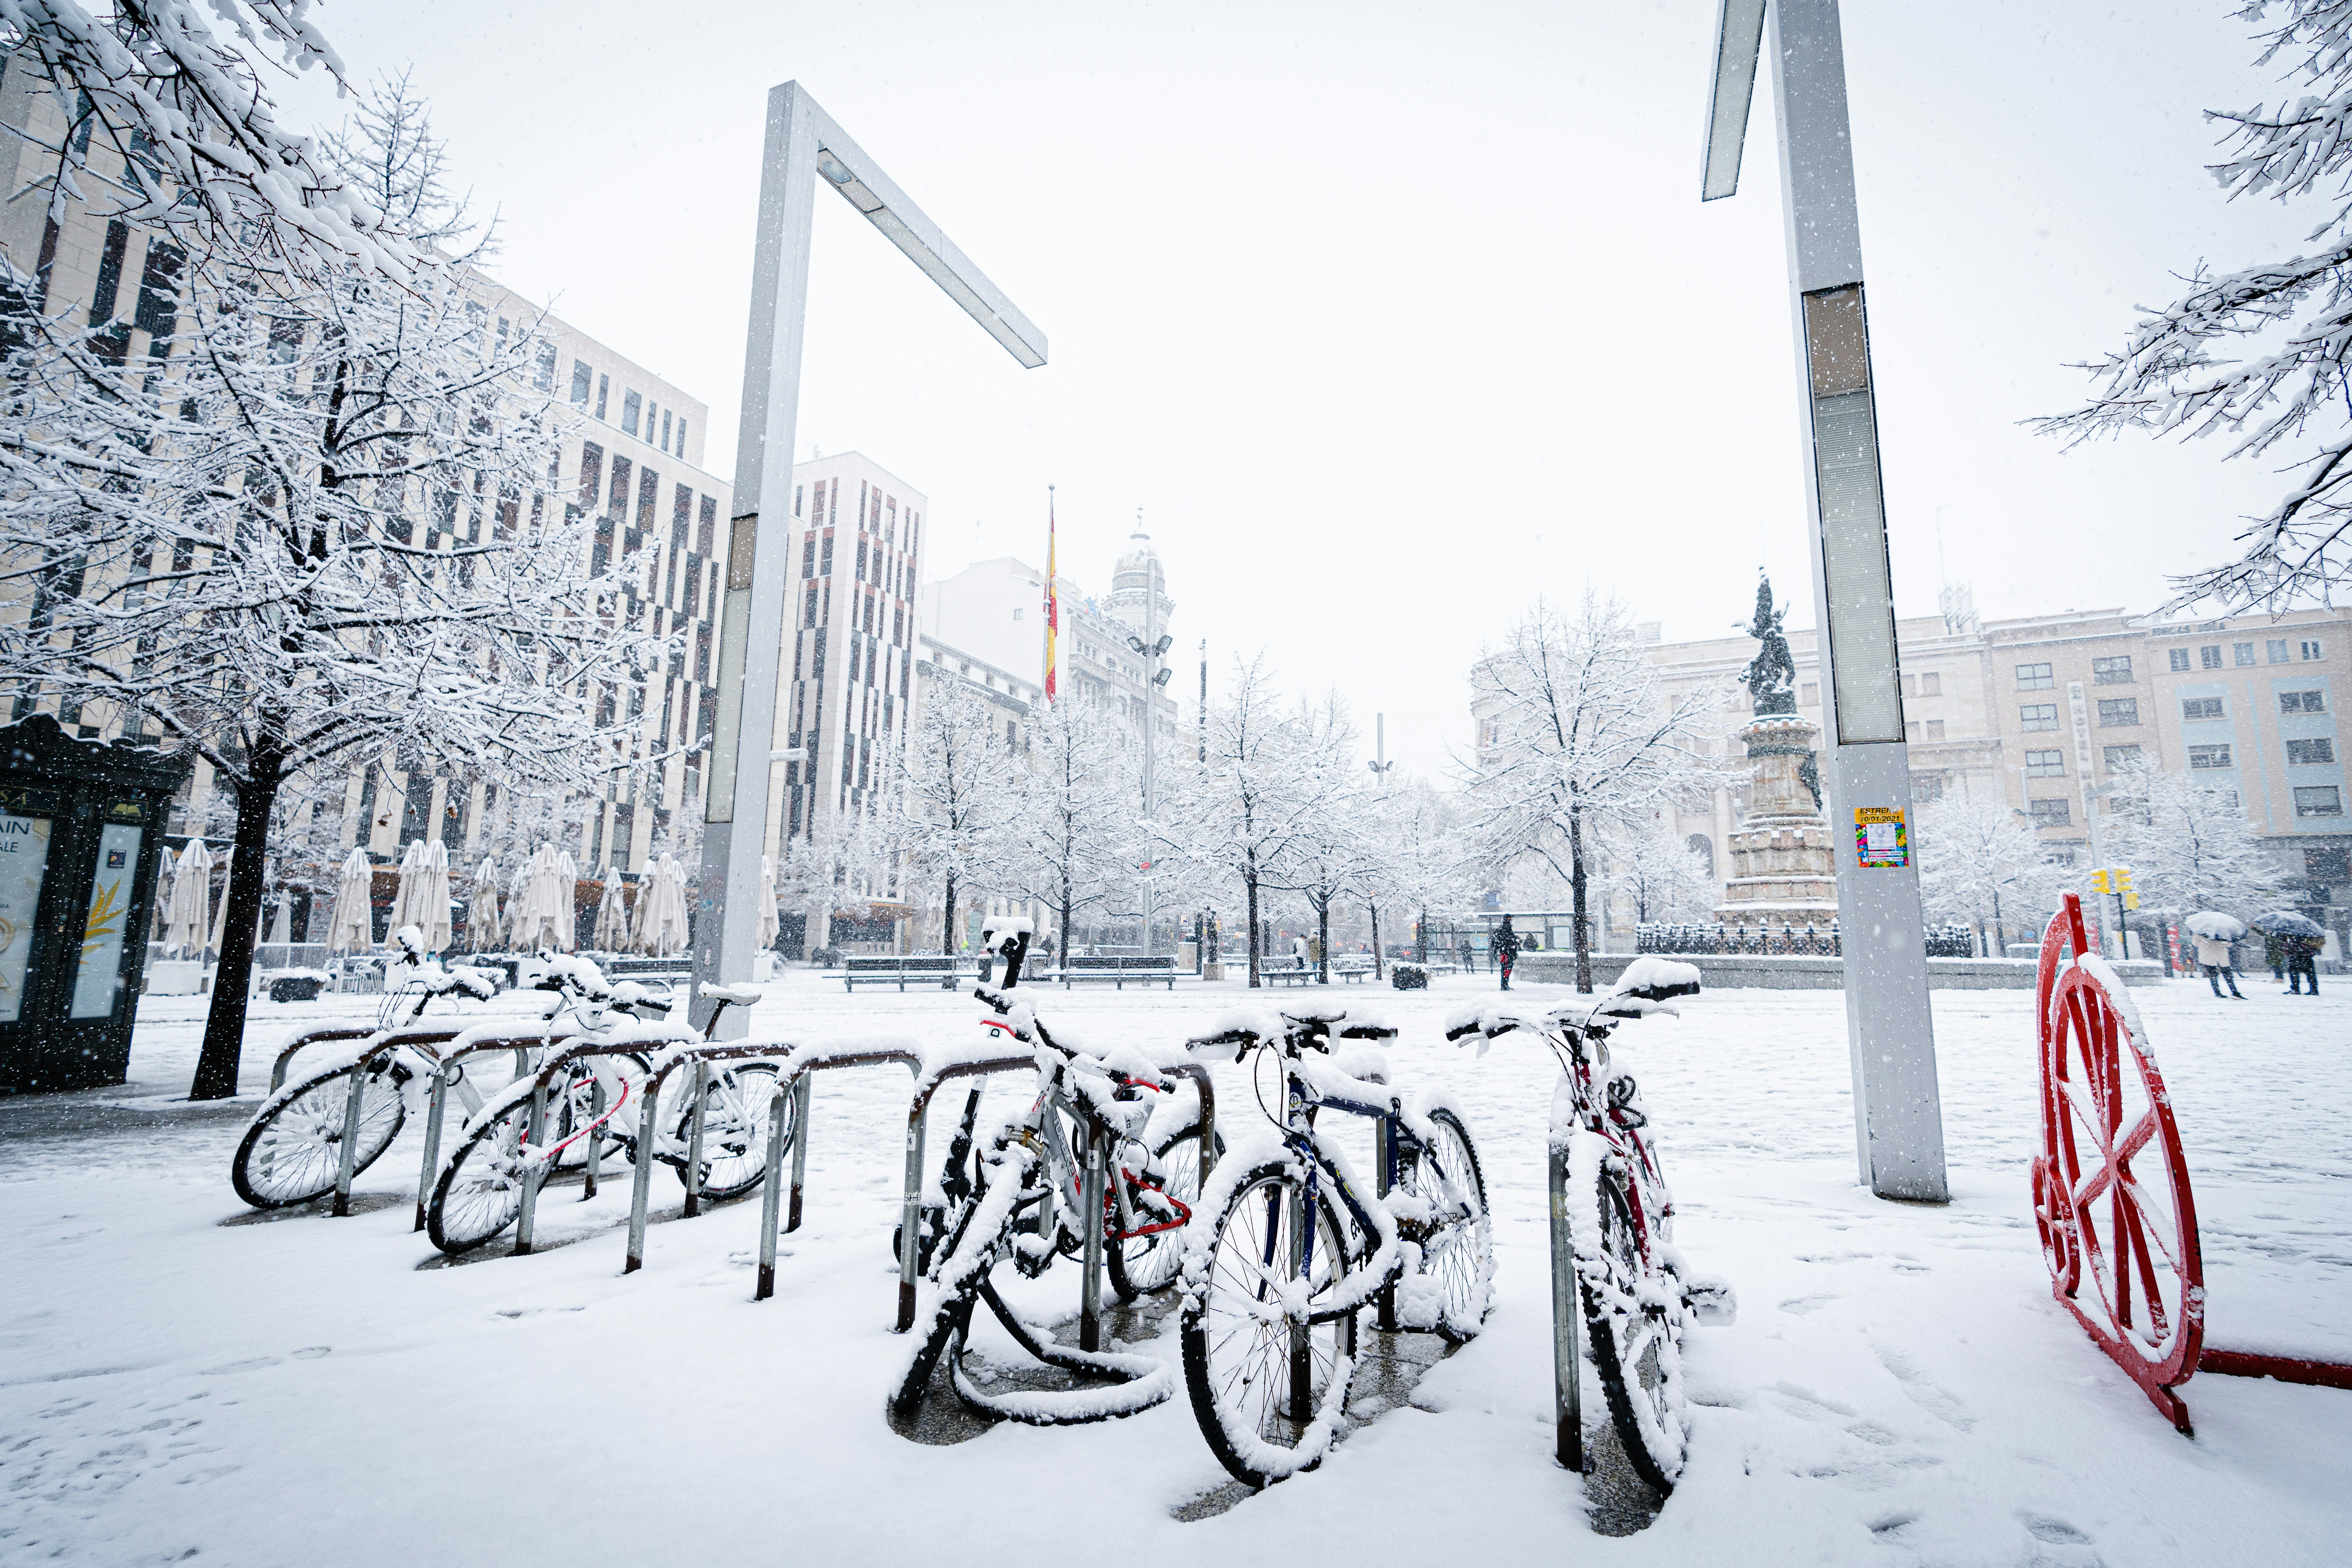 Bike station with bikes covered with snow.